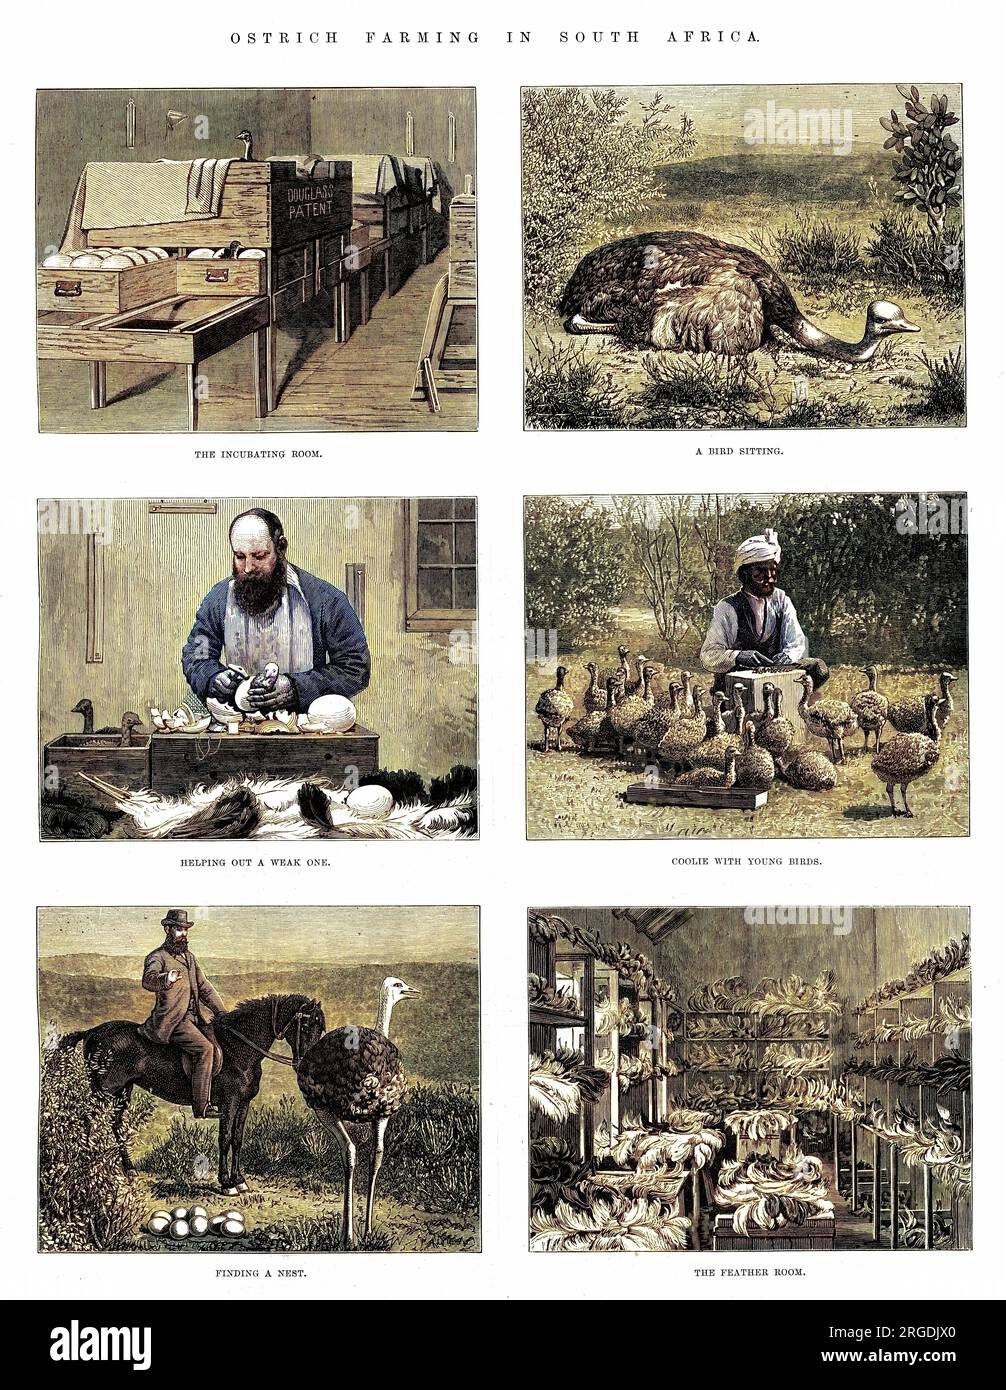 An 1870s artists impression of ostrich farming in South Africa, showing six stages of the process. Stock Photo